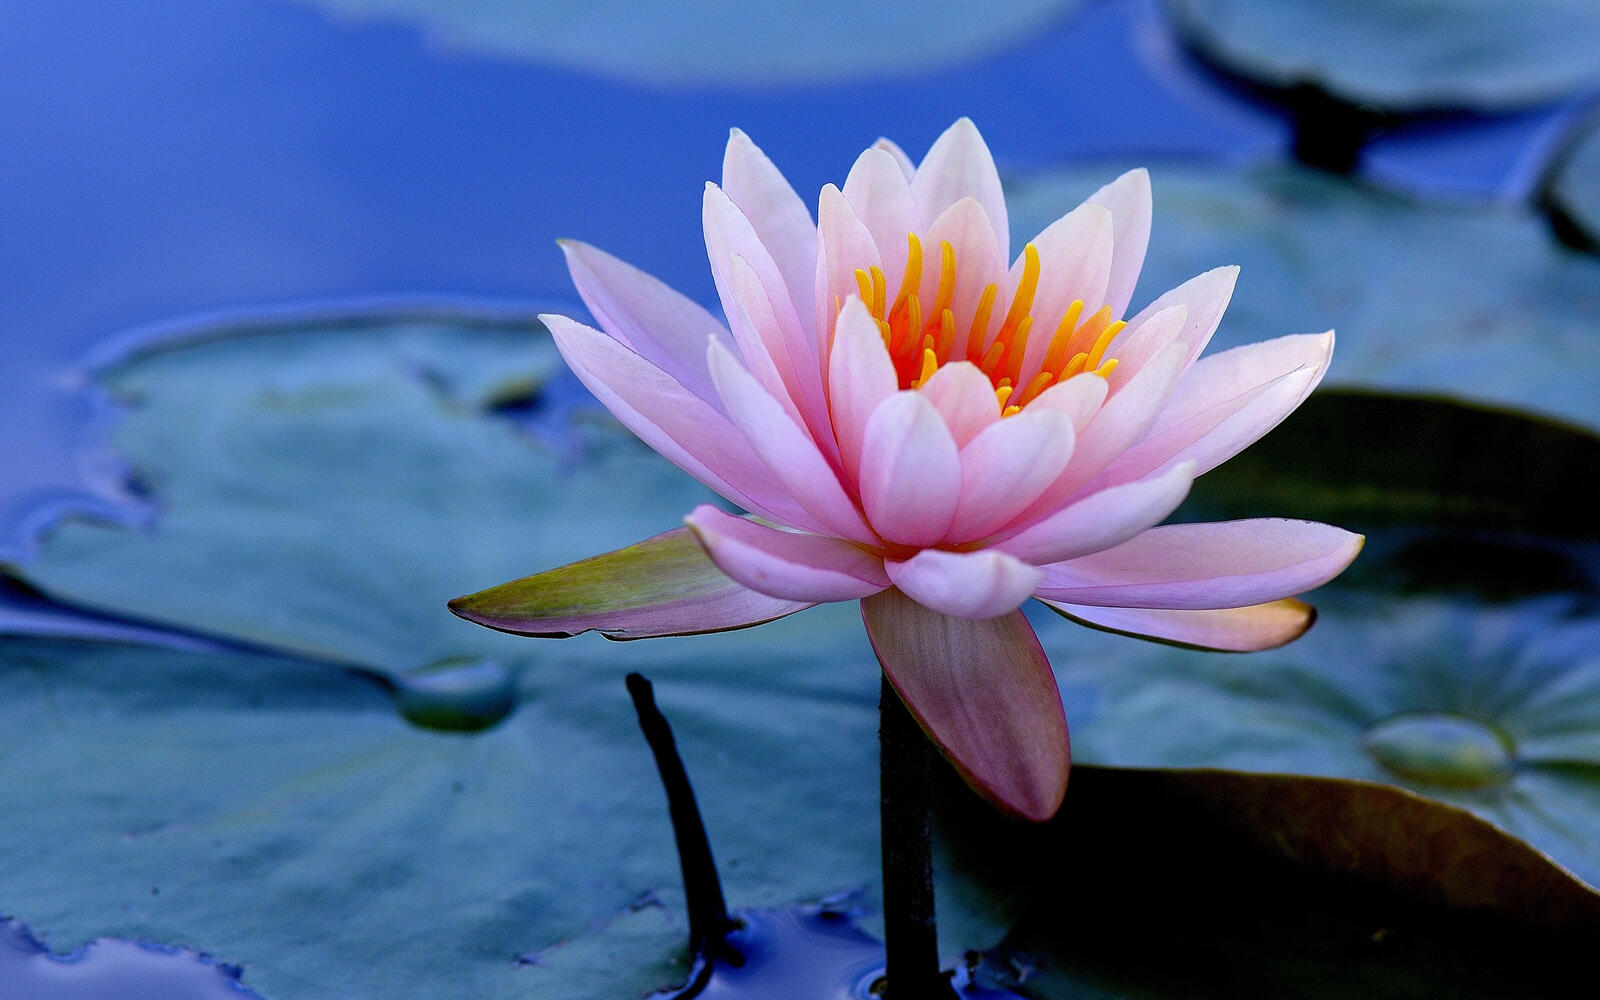 Free photo The water lily is pink in color